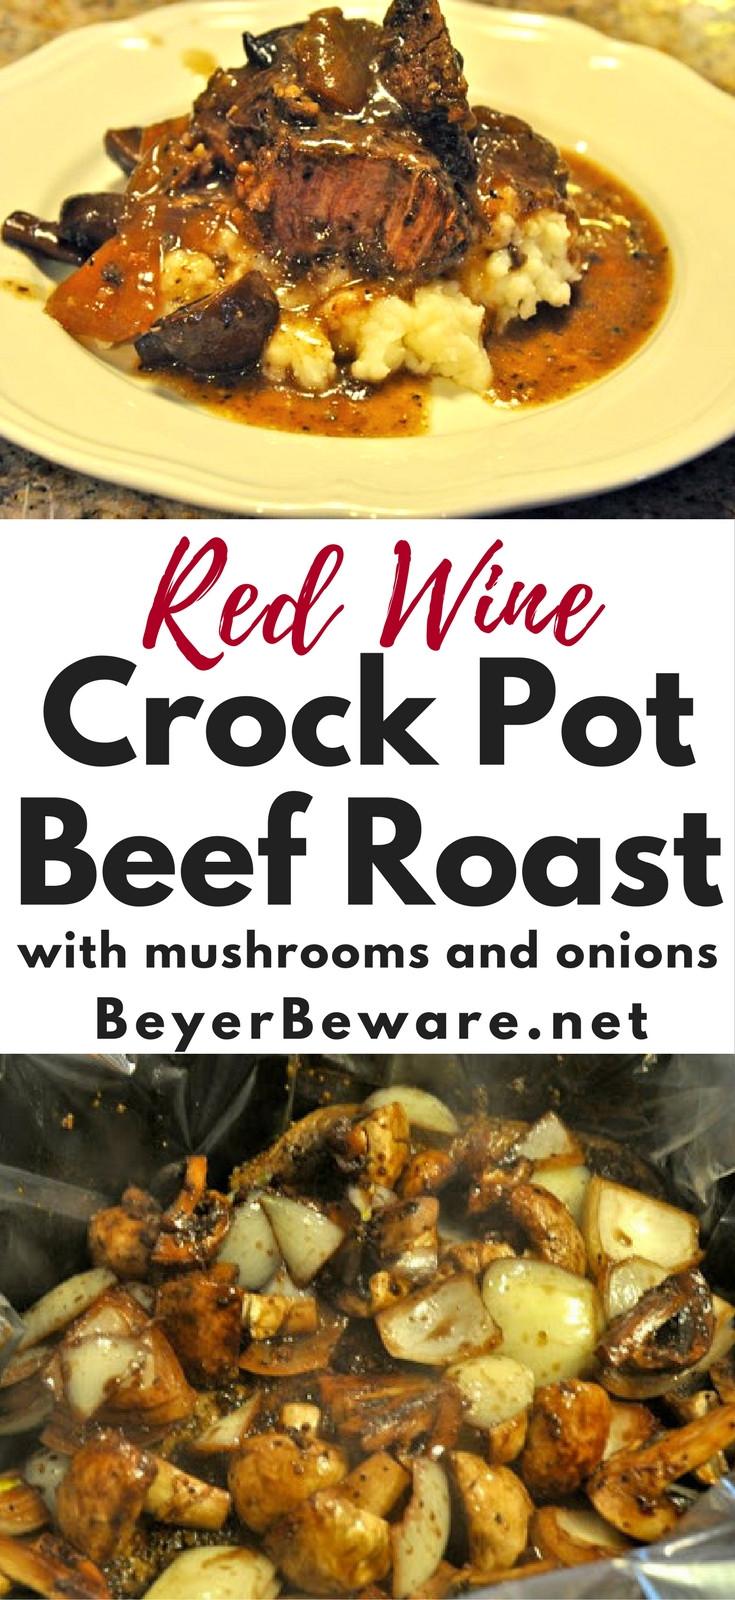 Lamb Stew In Crock Pot
 Red Wine Crock Pot Beef Roast with Mushrooms and ions